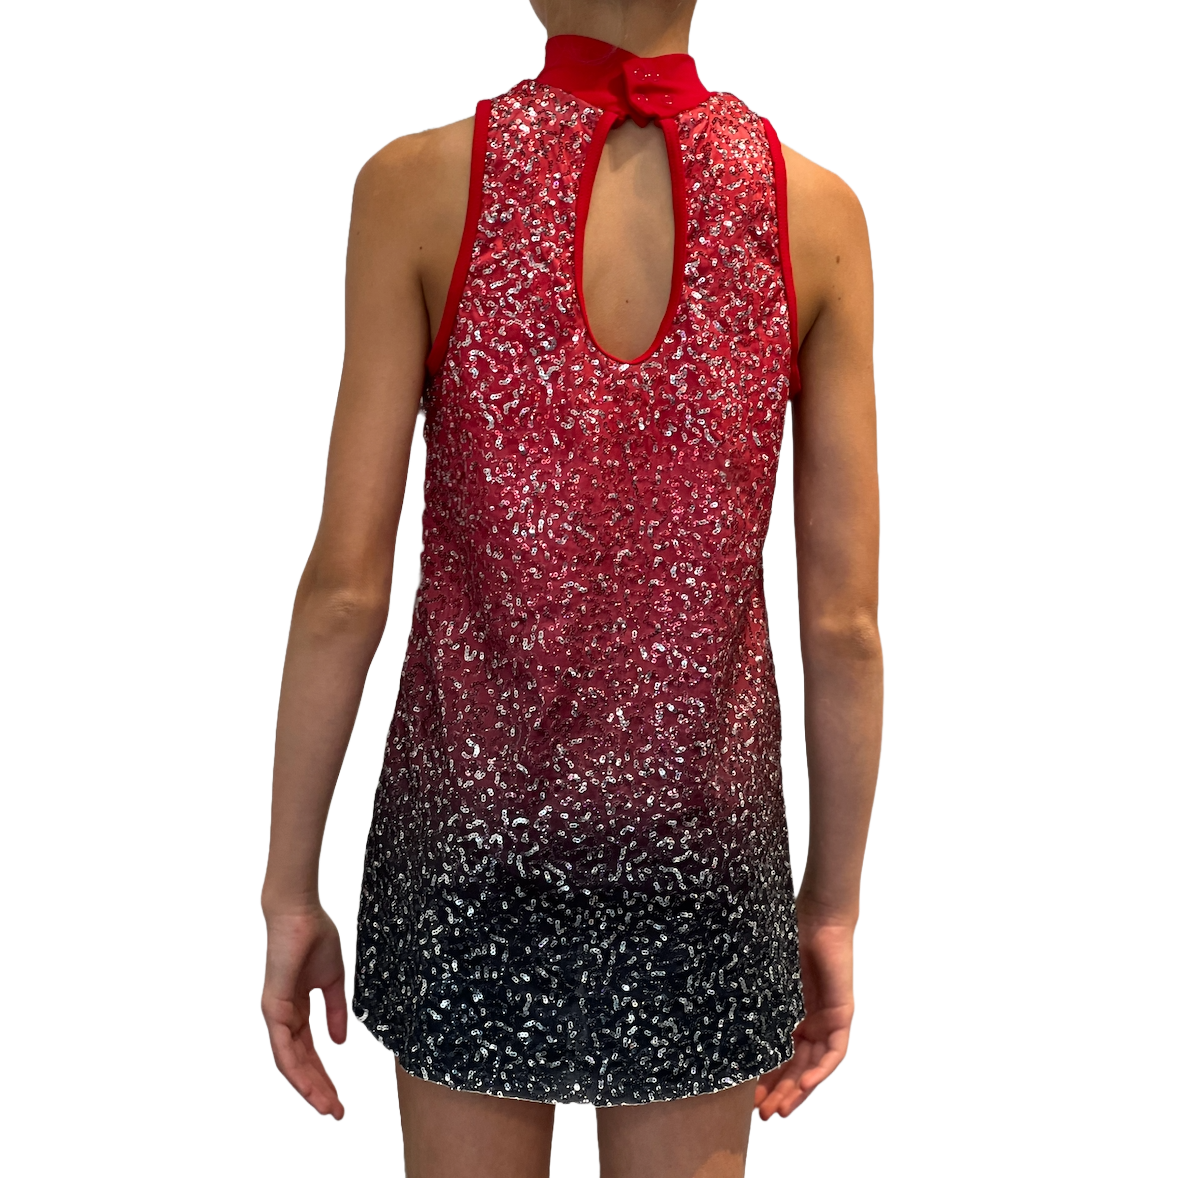 Red and Black Sequin Jazz Dress